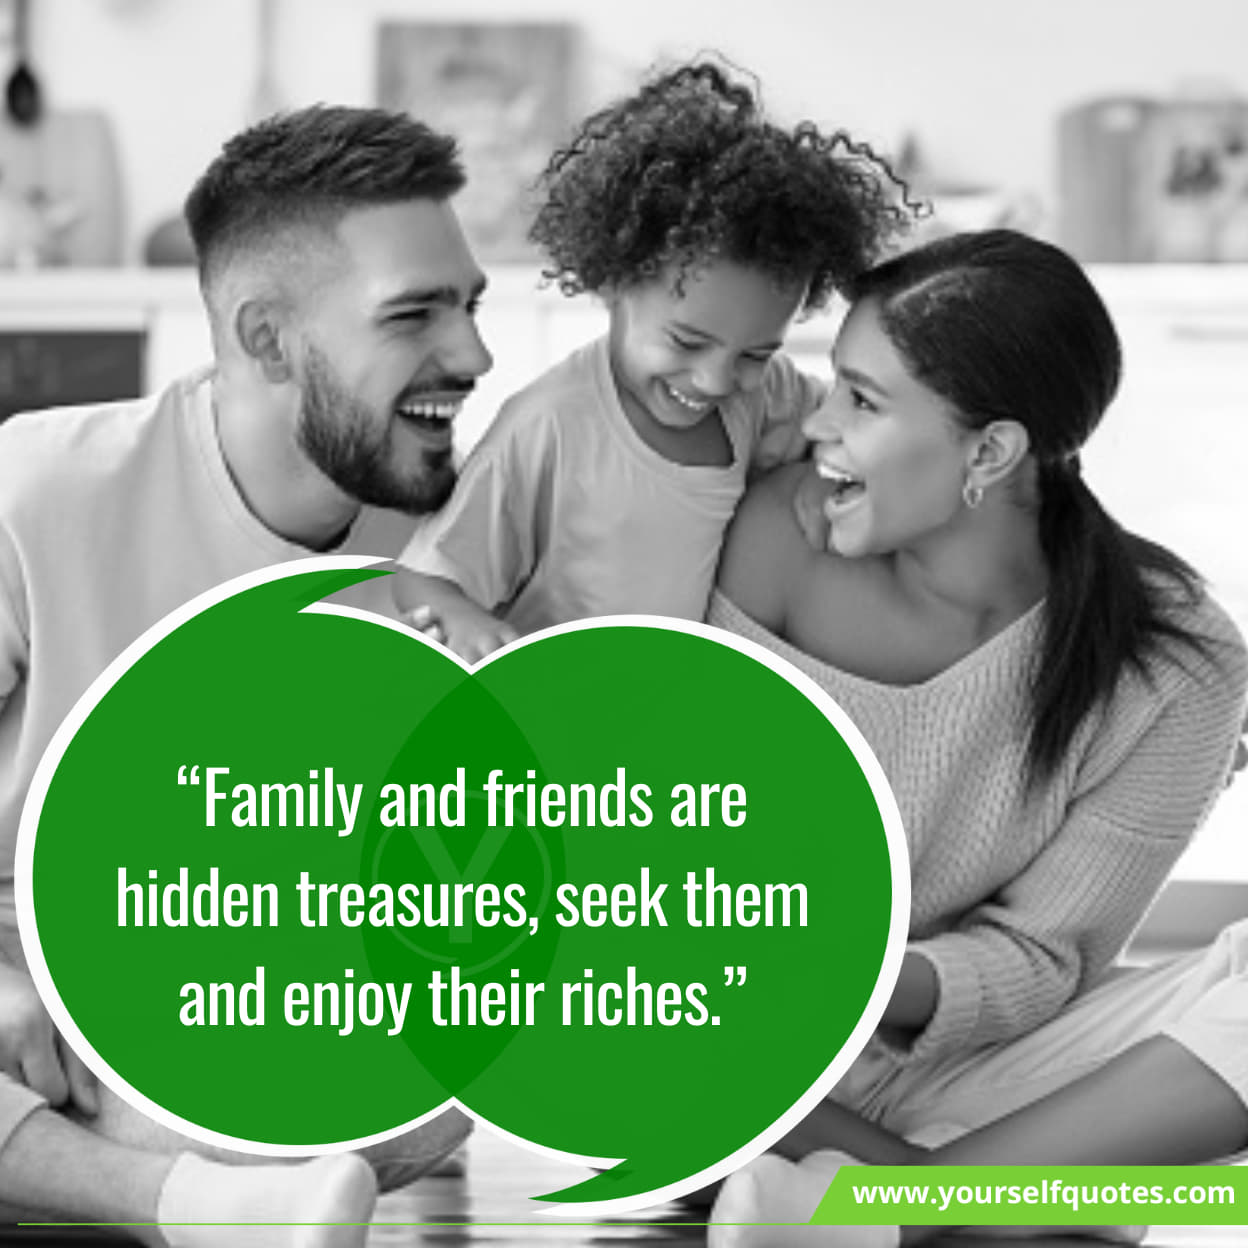 Inspiring Famous Quotes About Family